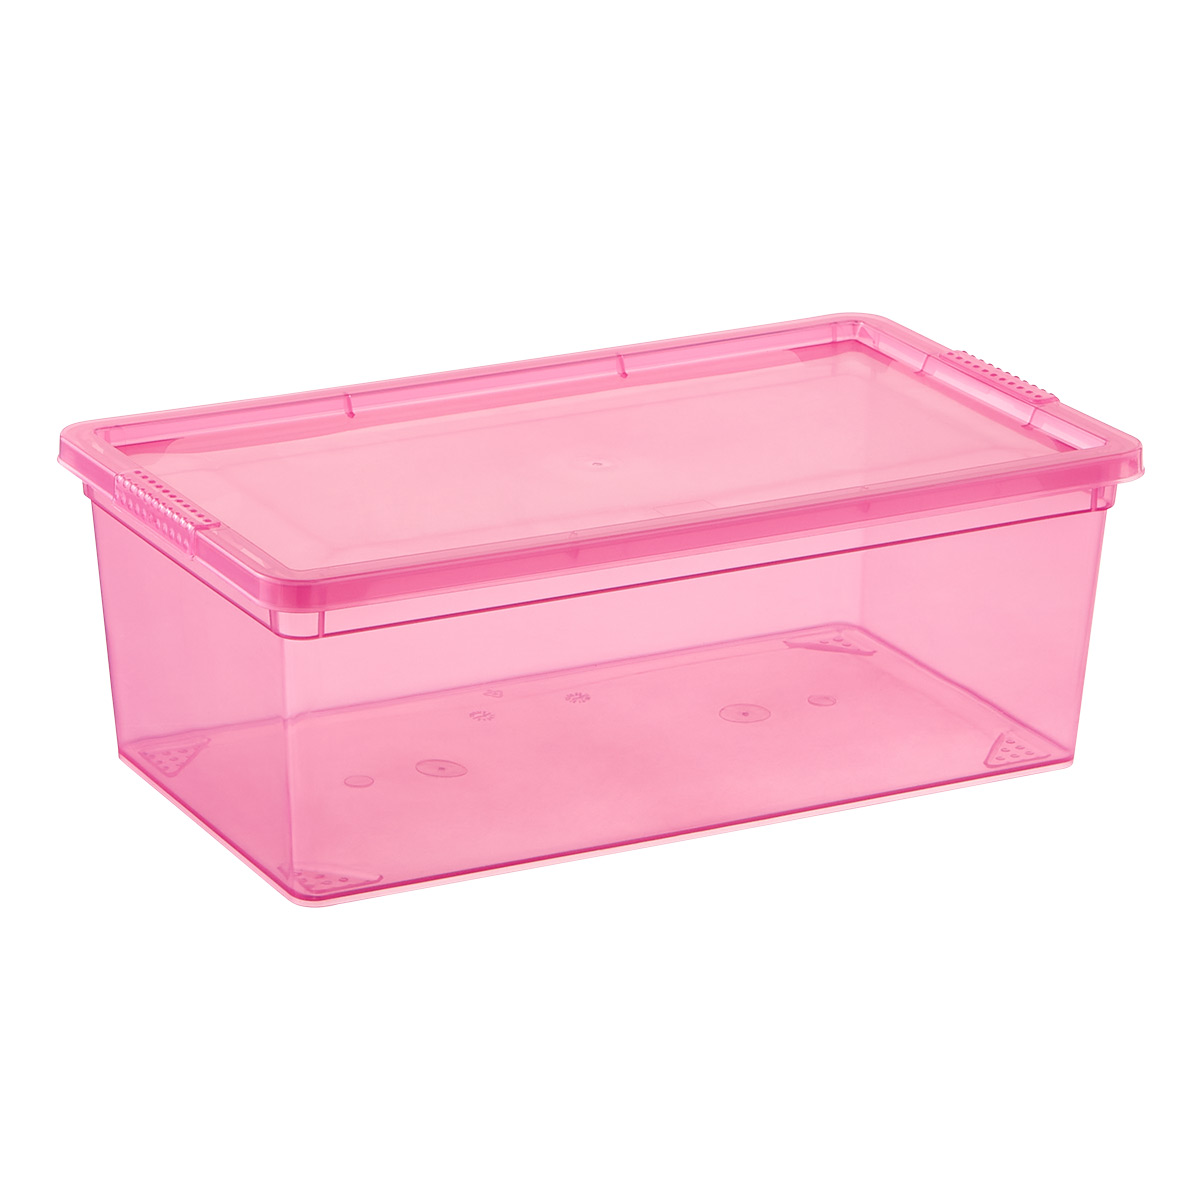 https://www.containerstore.com/catalogimages/434121/10085537_small_our_tidy_box_fuchsia.jpg